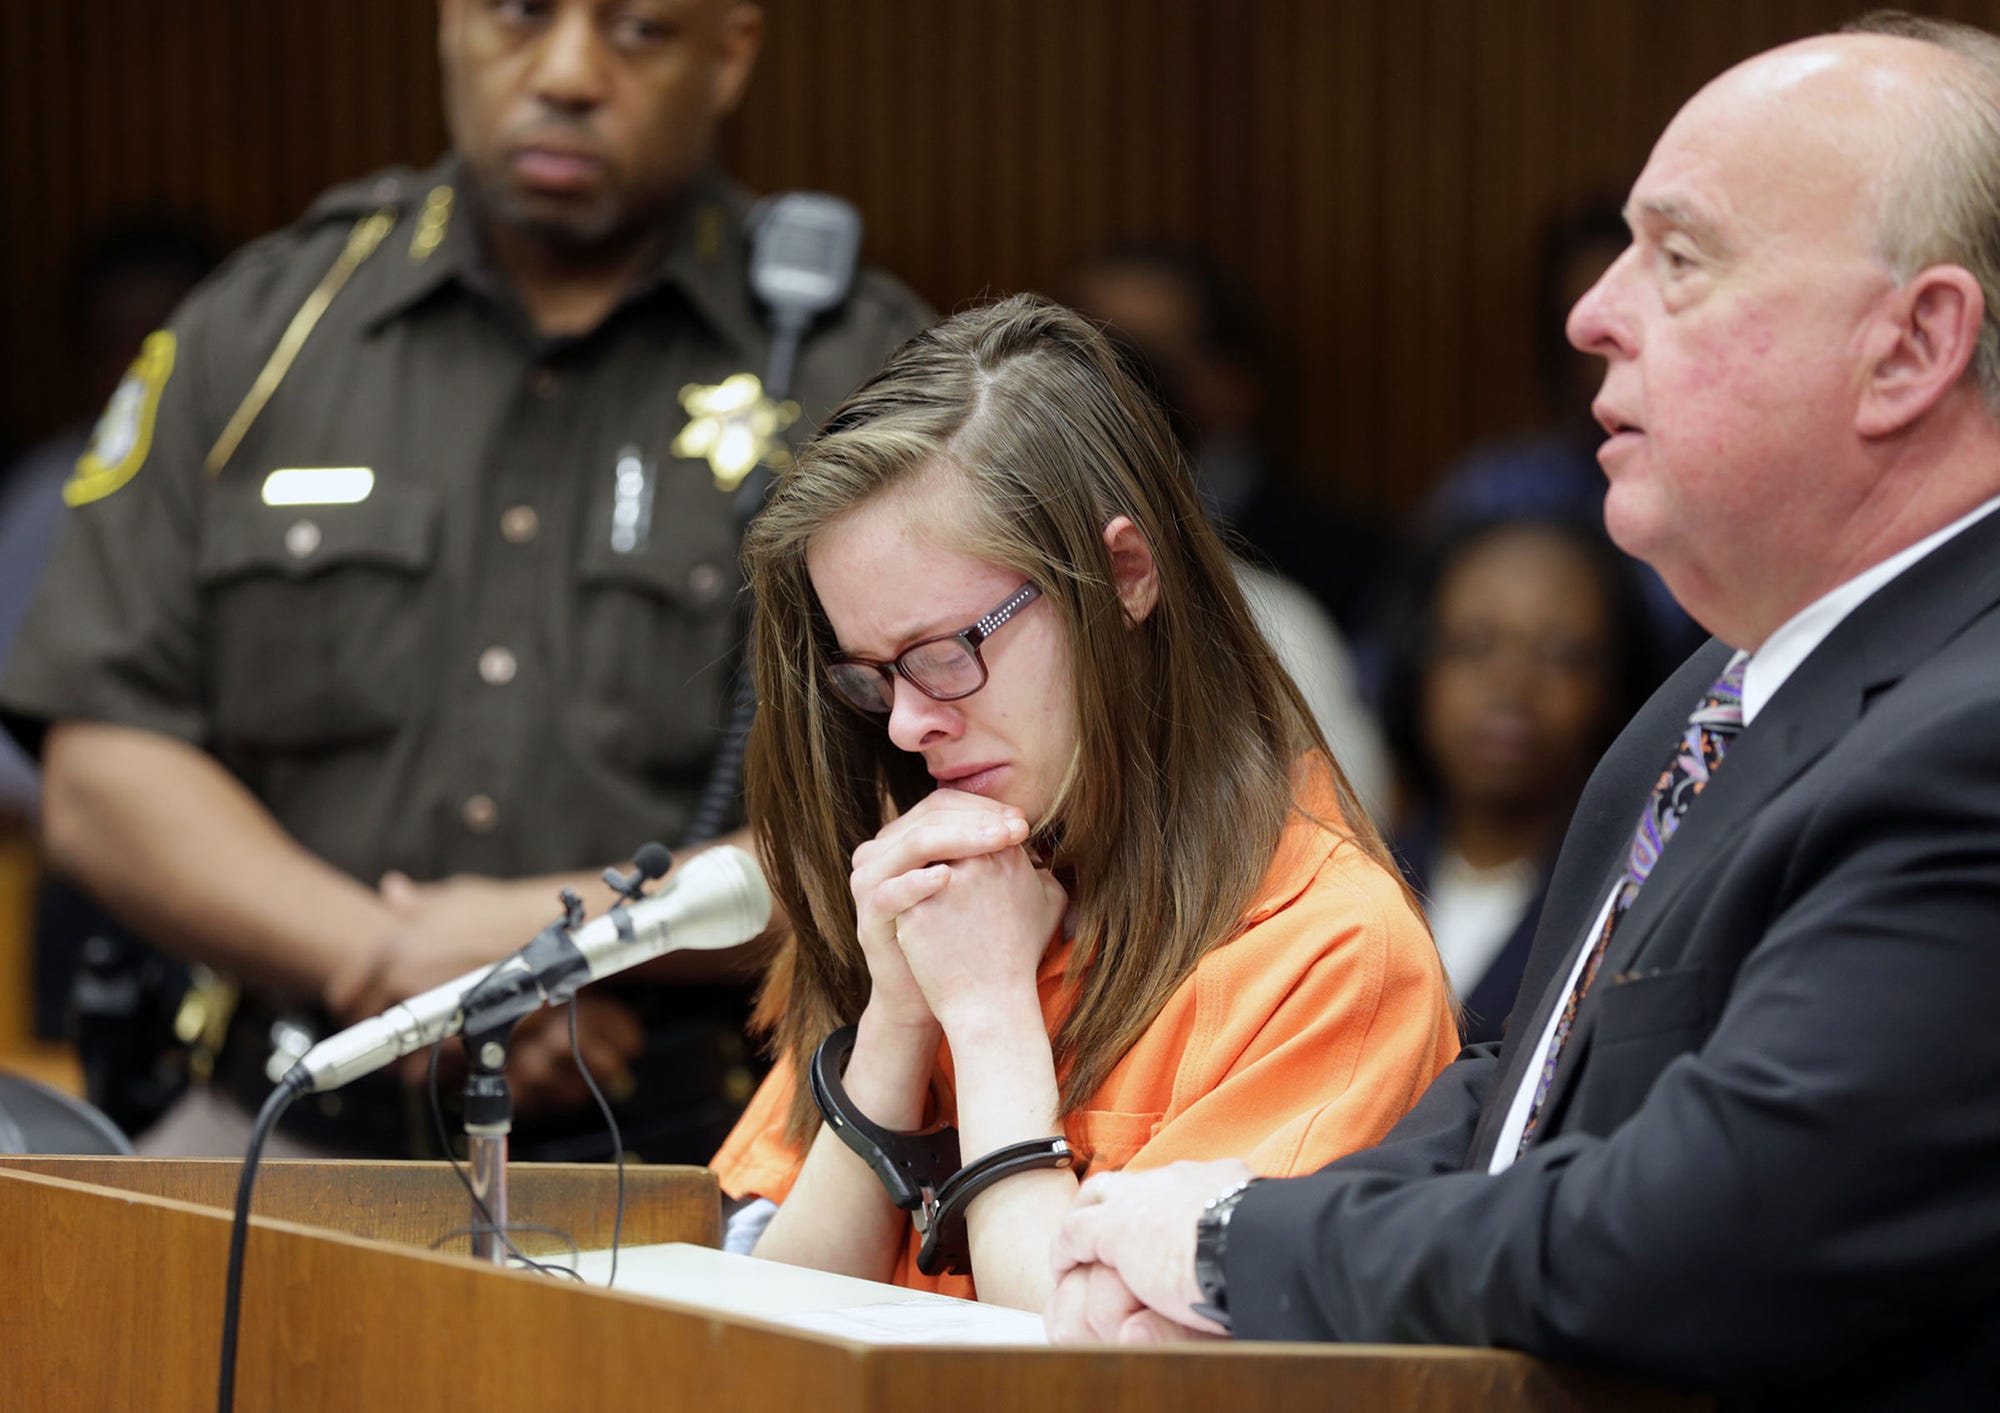 Michigan girl, 17, gets 10-20 years in plot to kill family thv11 pic